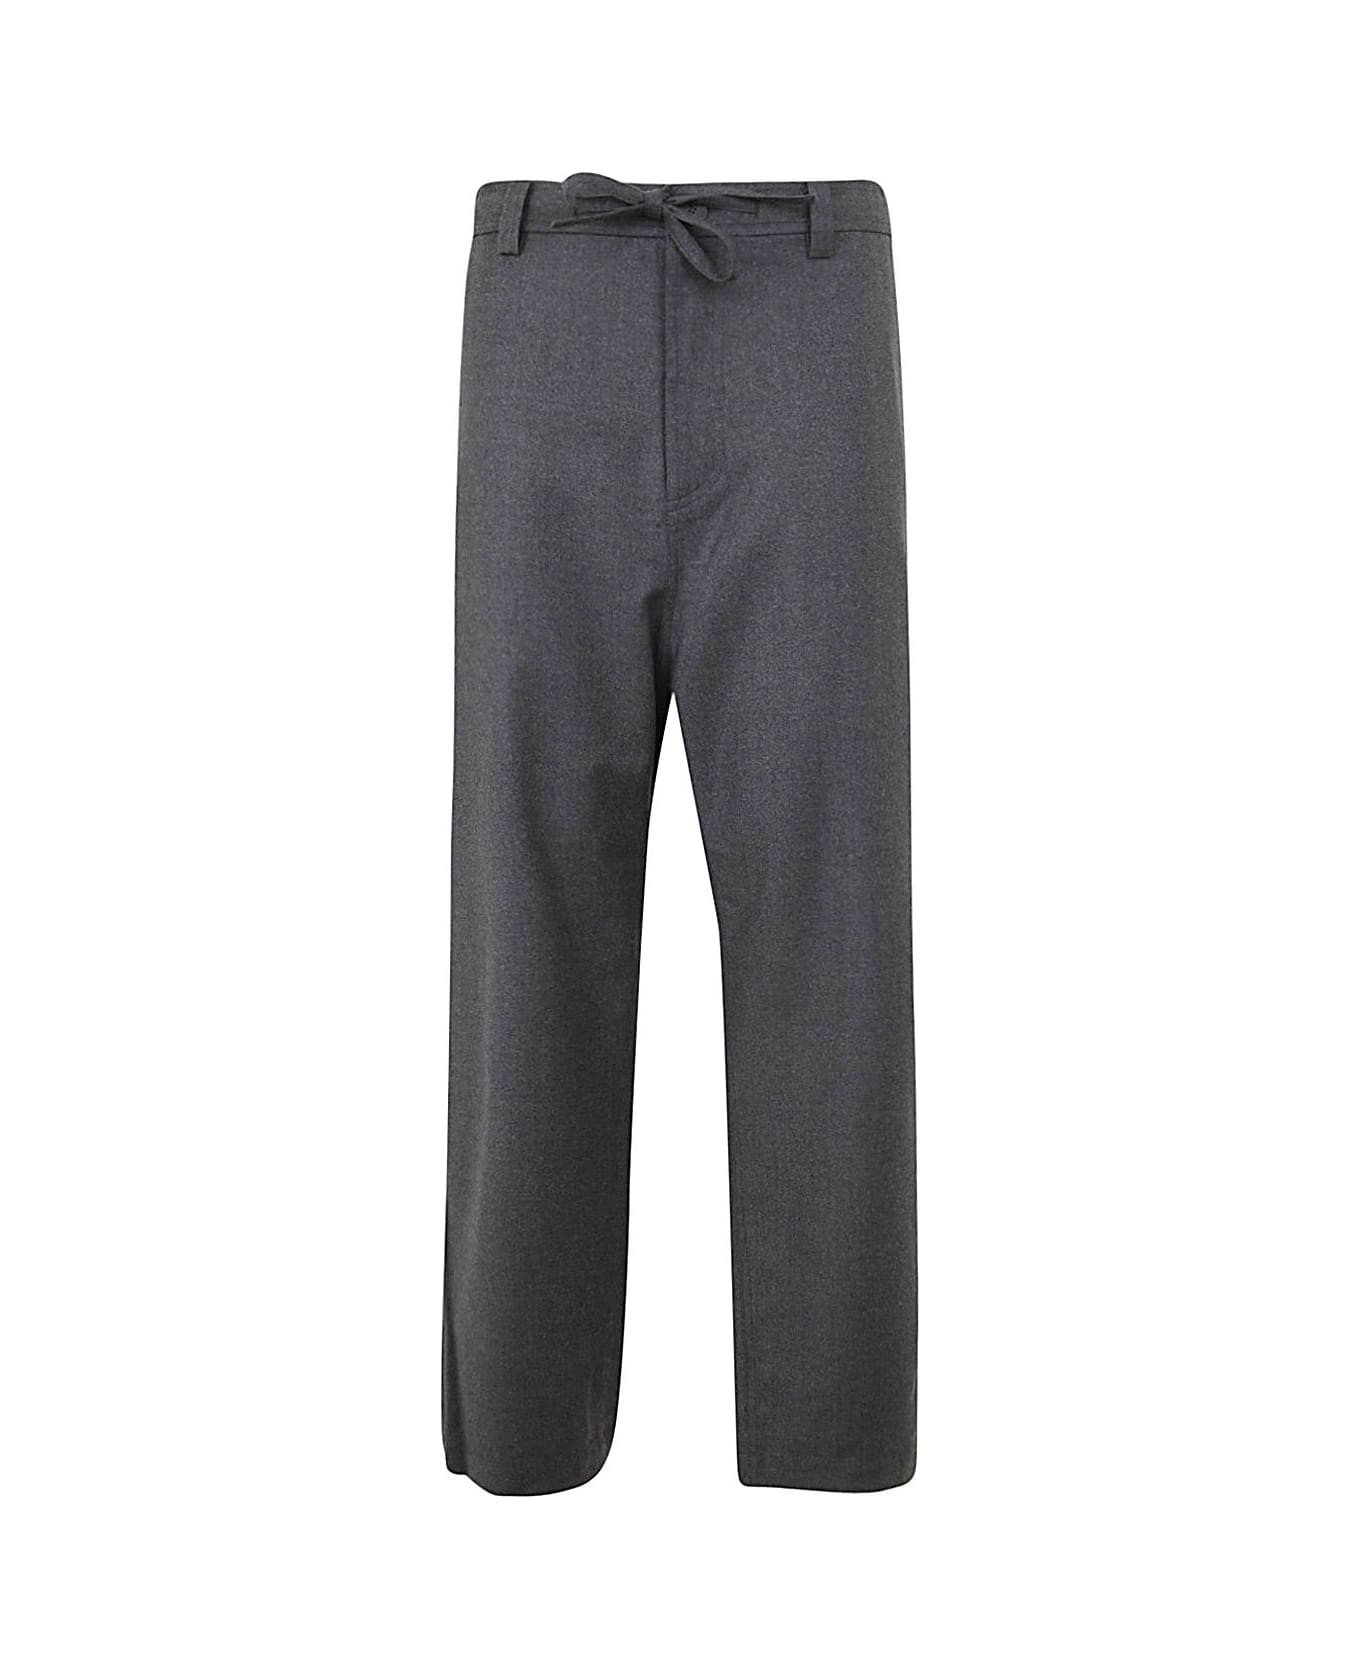 Sofie d'Hoore Low Crotch Pants With Zip And Drawstring - Mid Grey Melange ボトムス